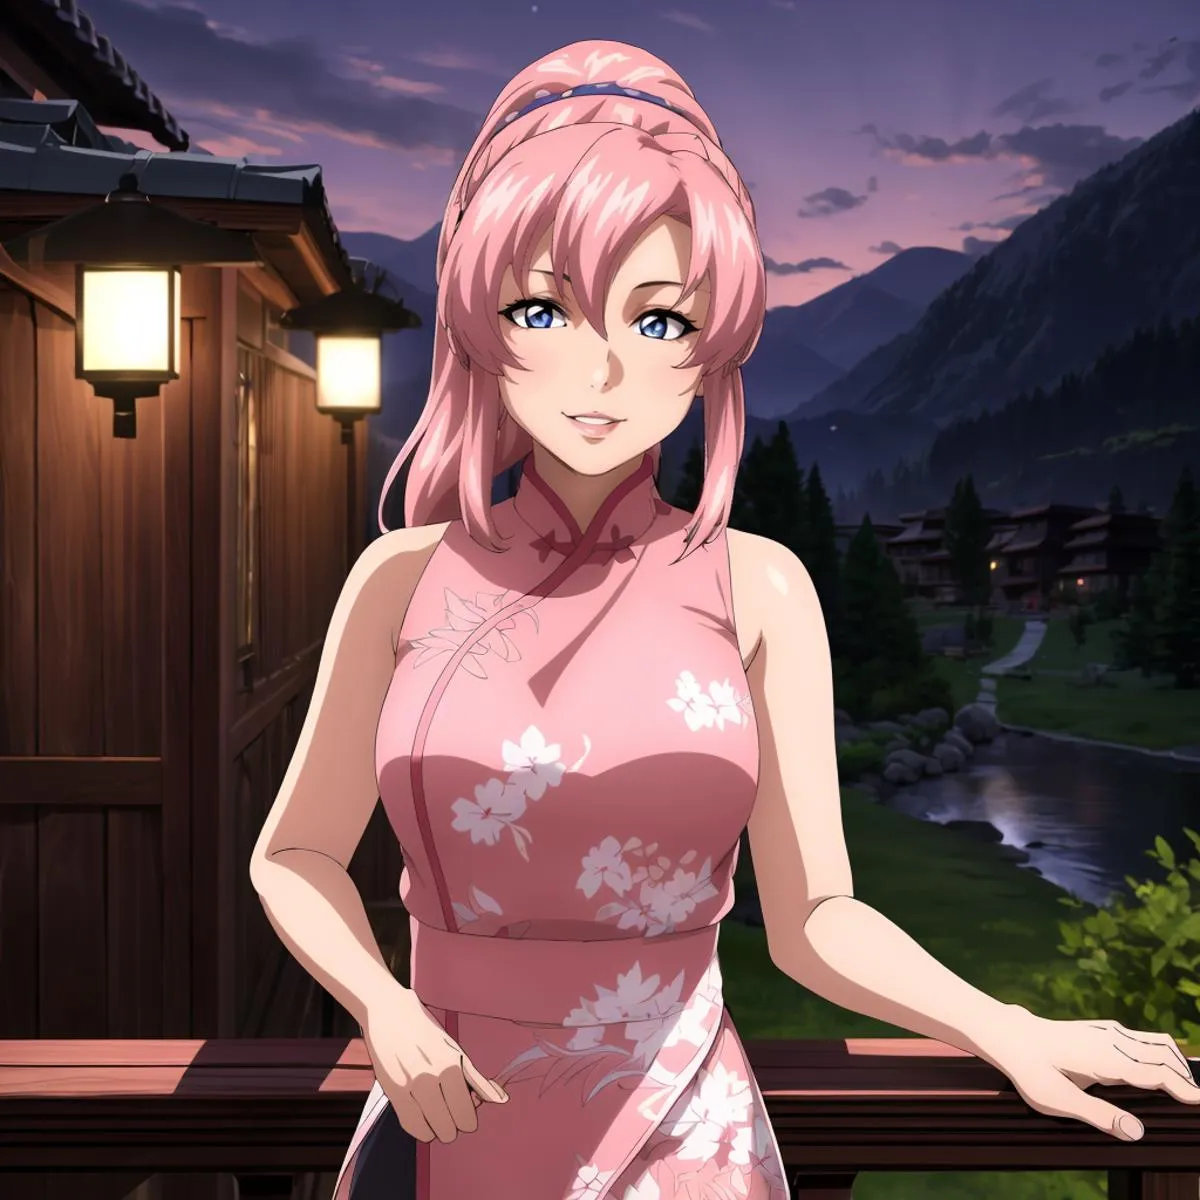 Anime girl with pink hair in traditional Chinese dress, set against a sunset mountain backdrop. AI generated image using stable diffusion.